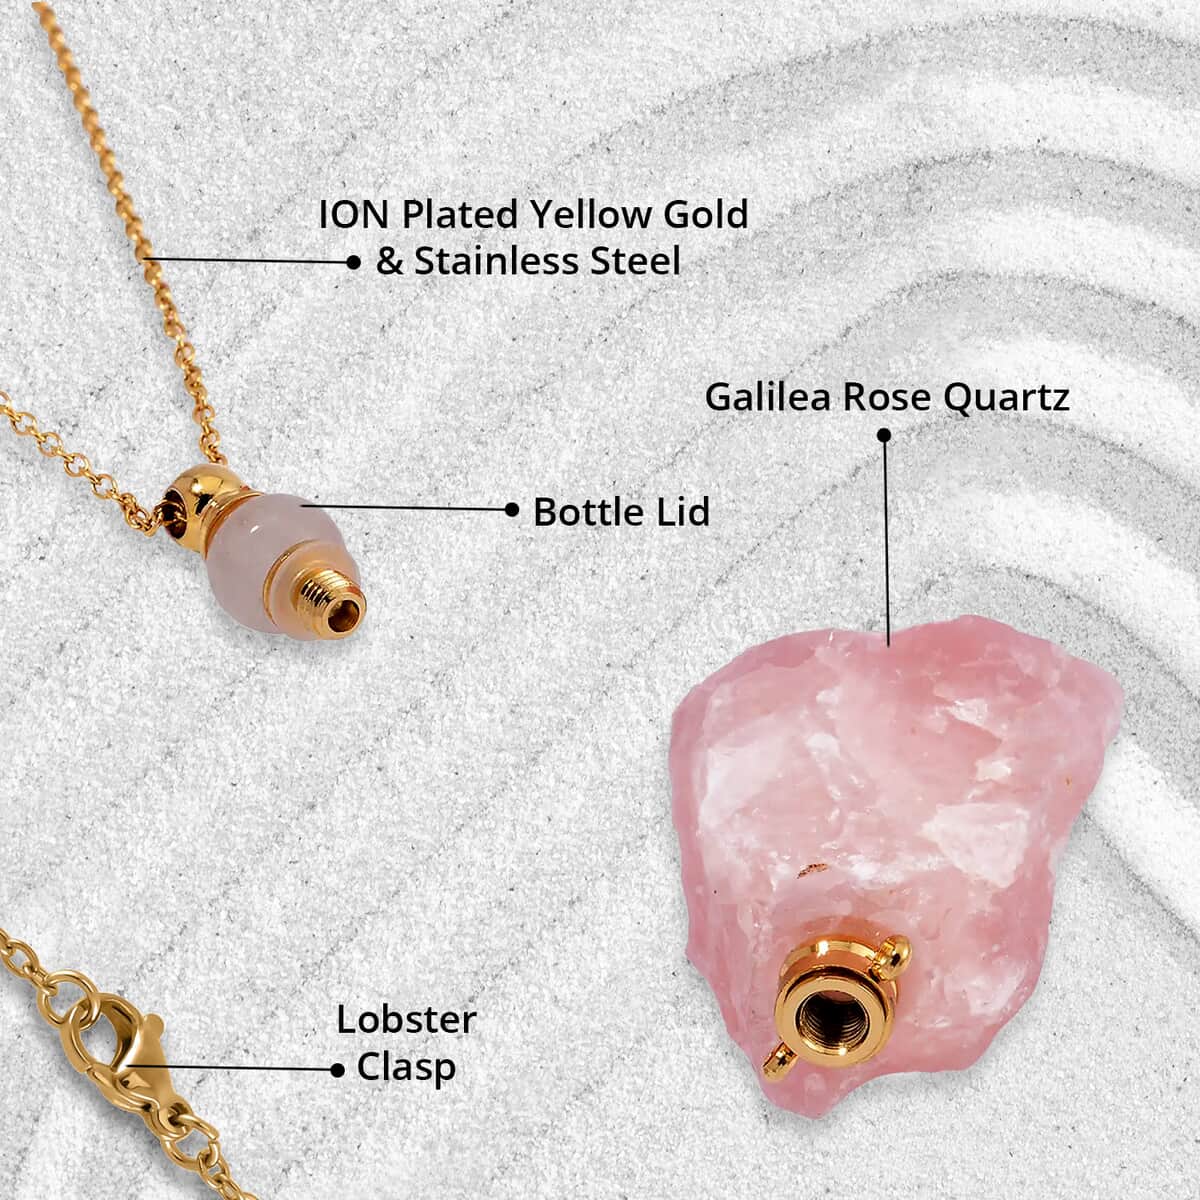 Galilea Rose Quartz 100.00 ctw Perfume Bottle Pendant in Goldtone with ION Plated Yellow Gold Stainless Steel Necklace 18-20 Inches image number 4